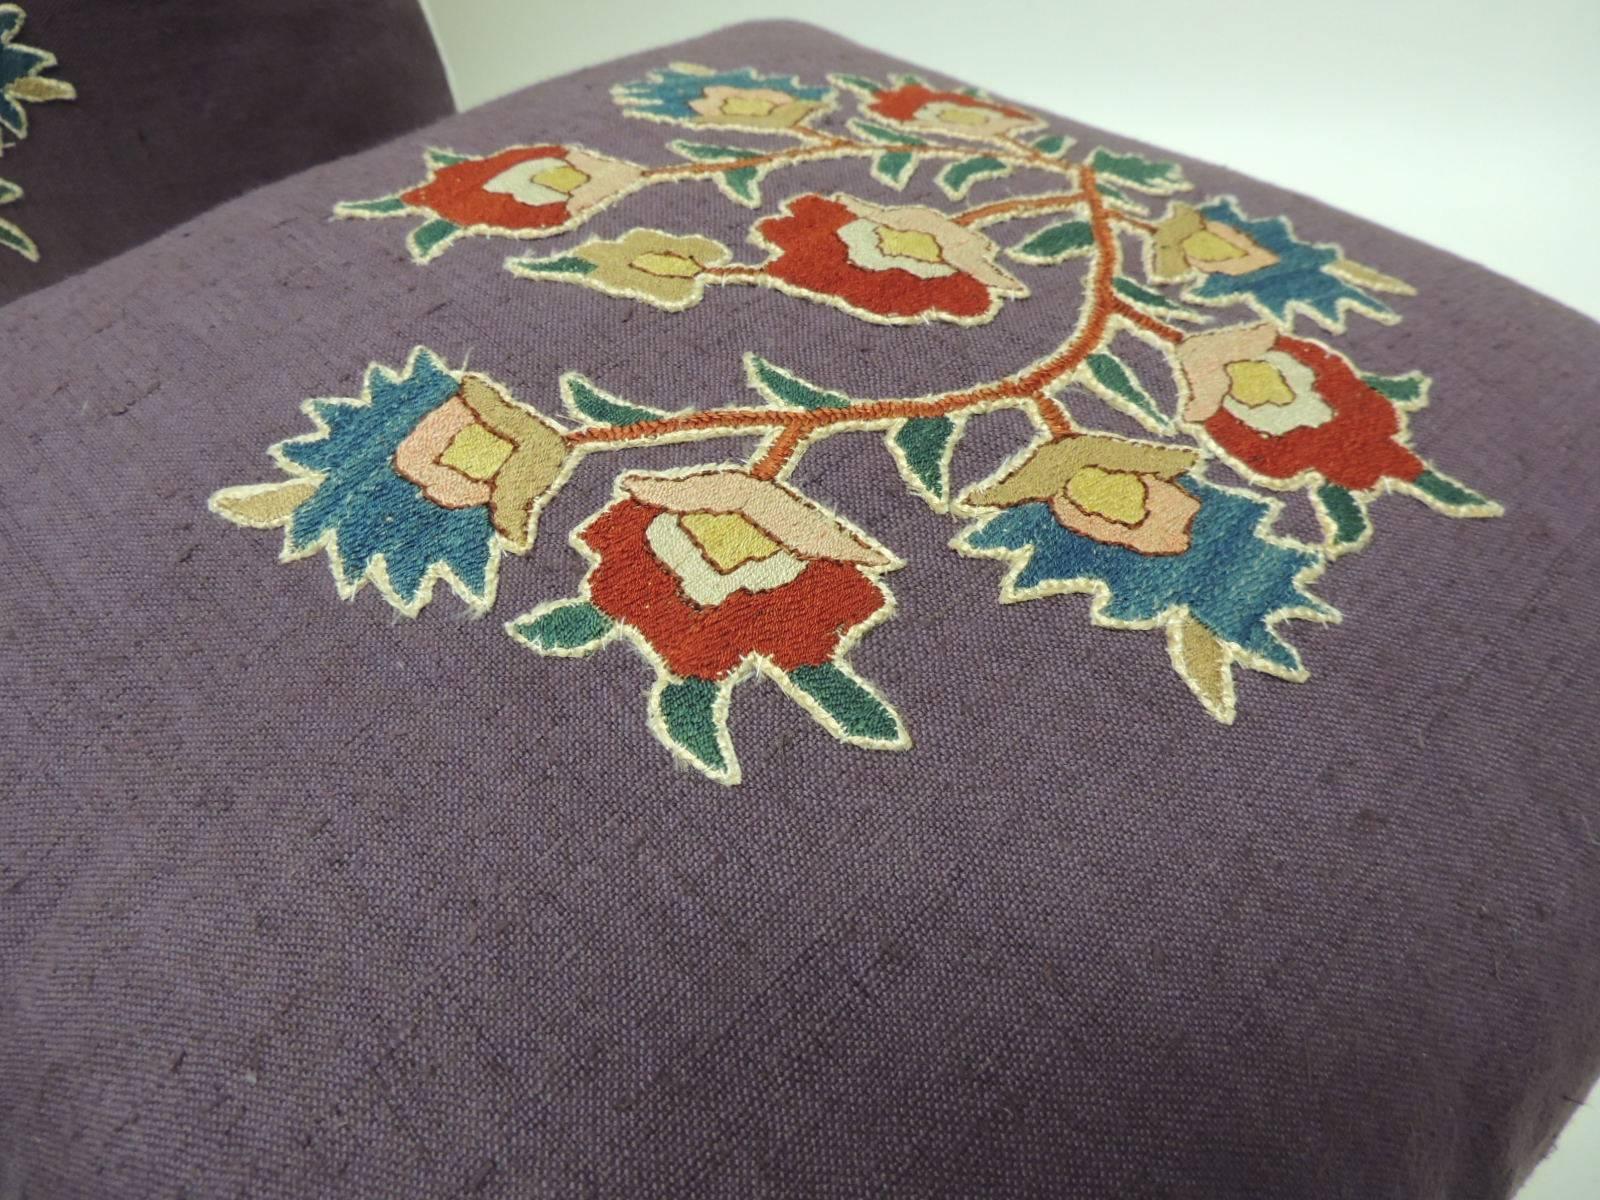 Hand-Crafted Pair of 19th c. Embroidery Hand Appliqué on Purple Linen Pillows